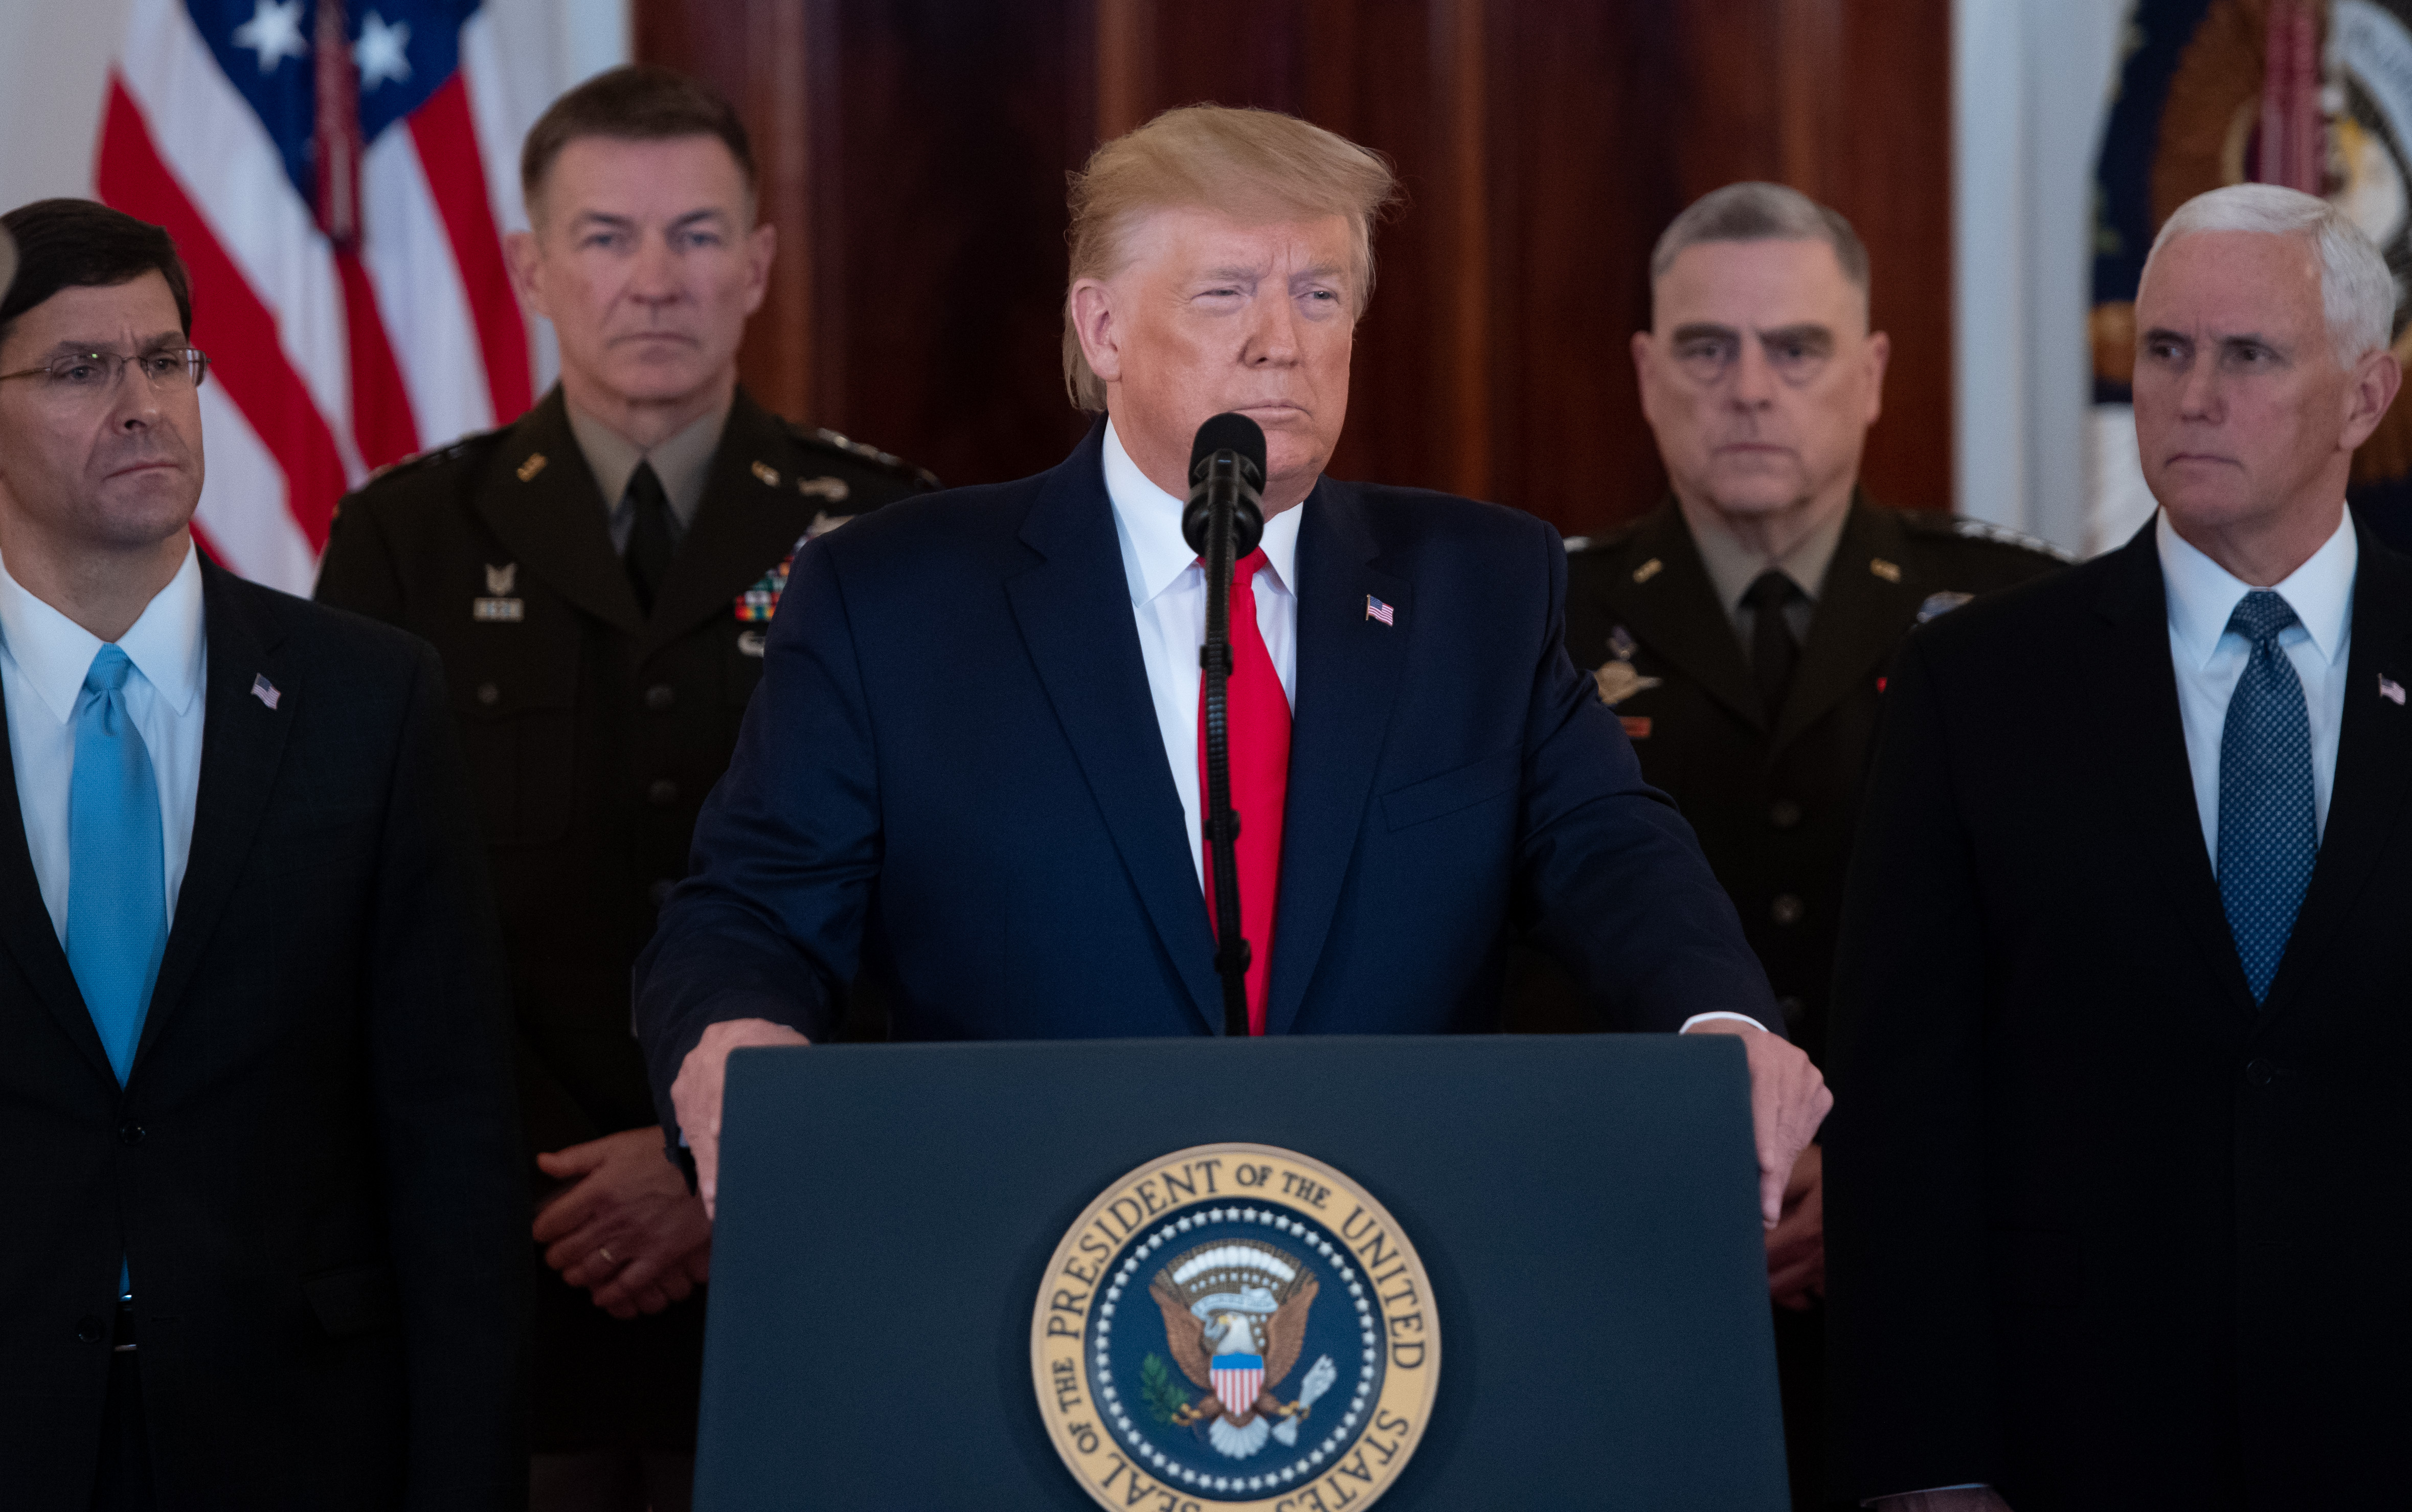 President Donald Trump stands at a podium backed by military commanders and Vice President Mike Pence.